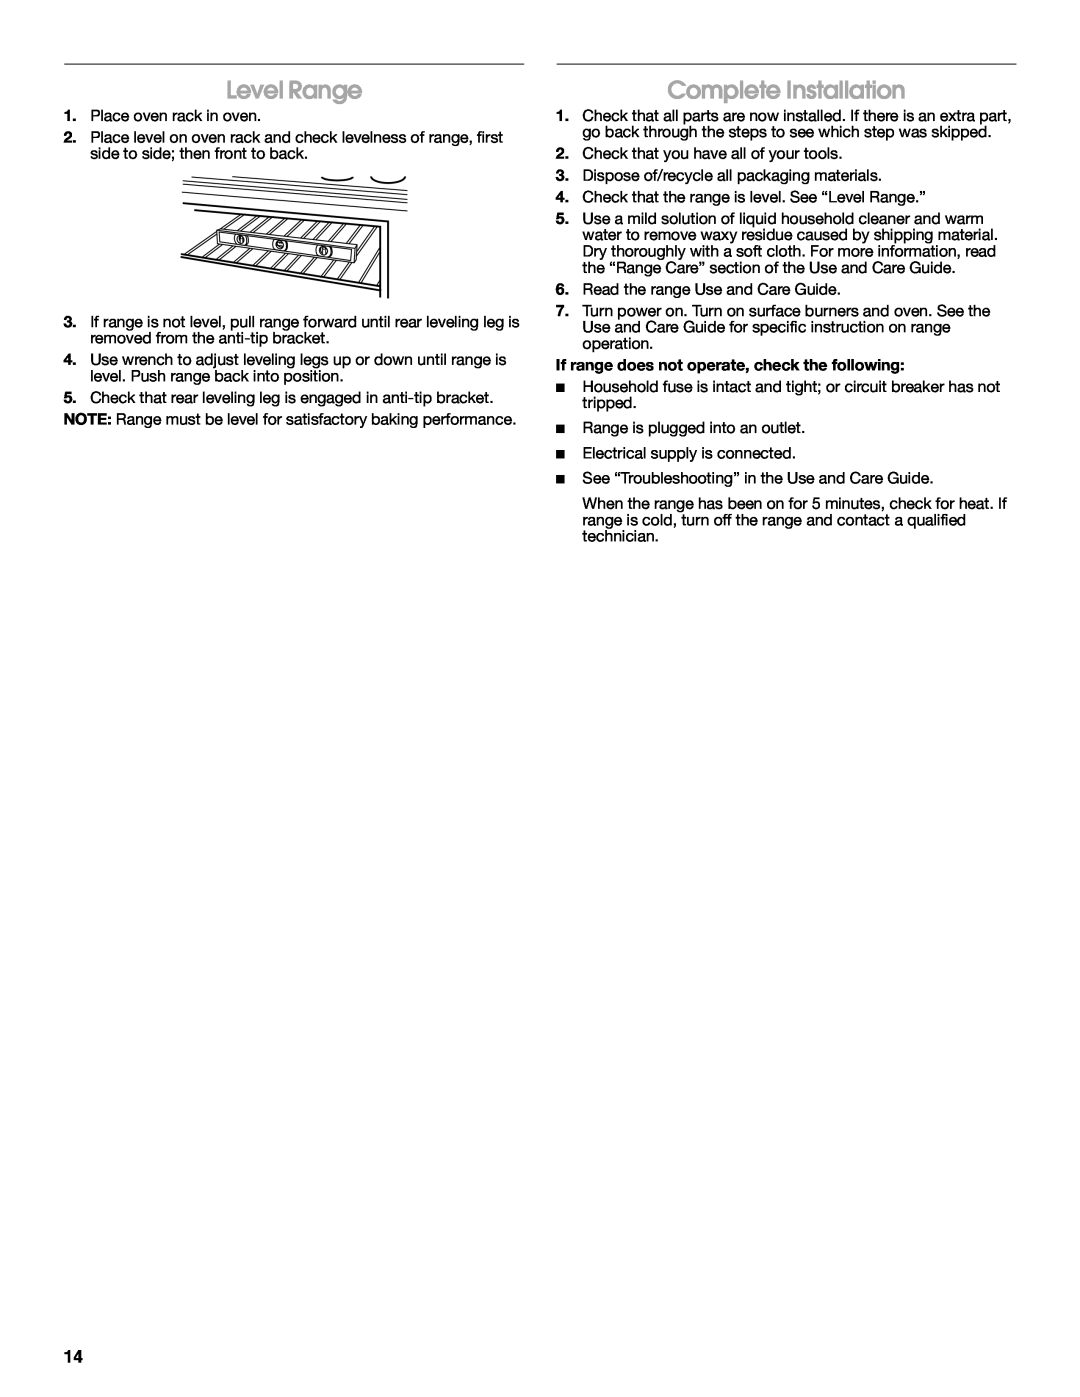 Whirlpool W10270322A Level Range, Complete Installation, If range does not operate, check the following 